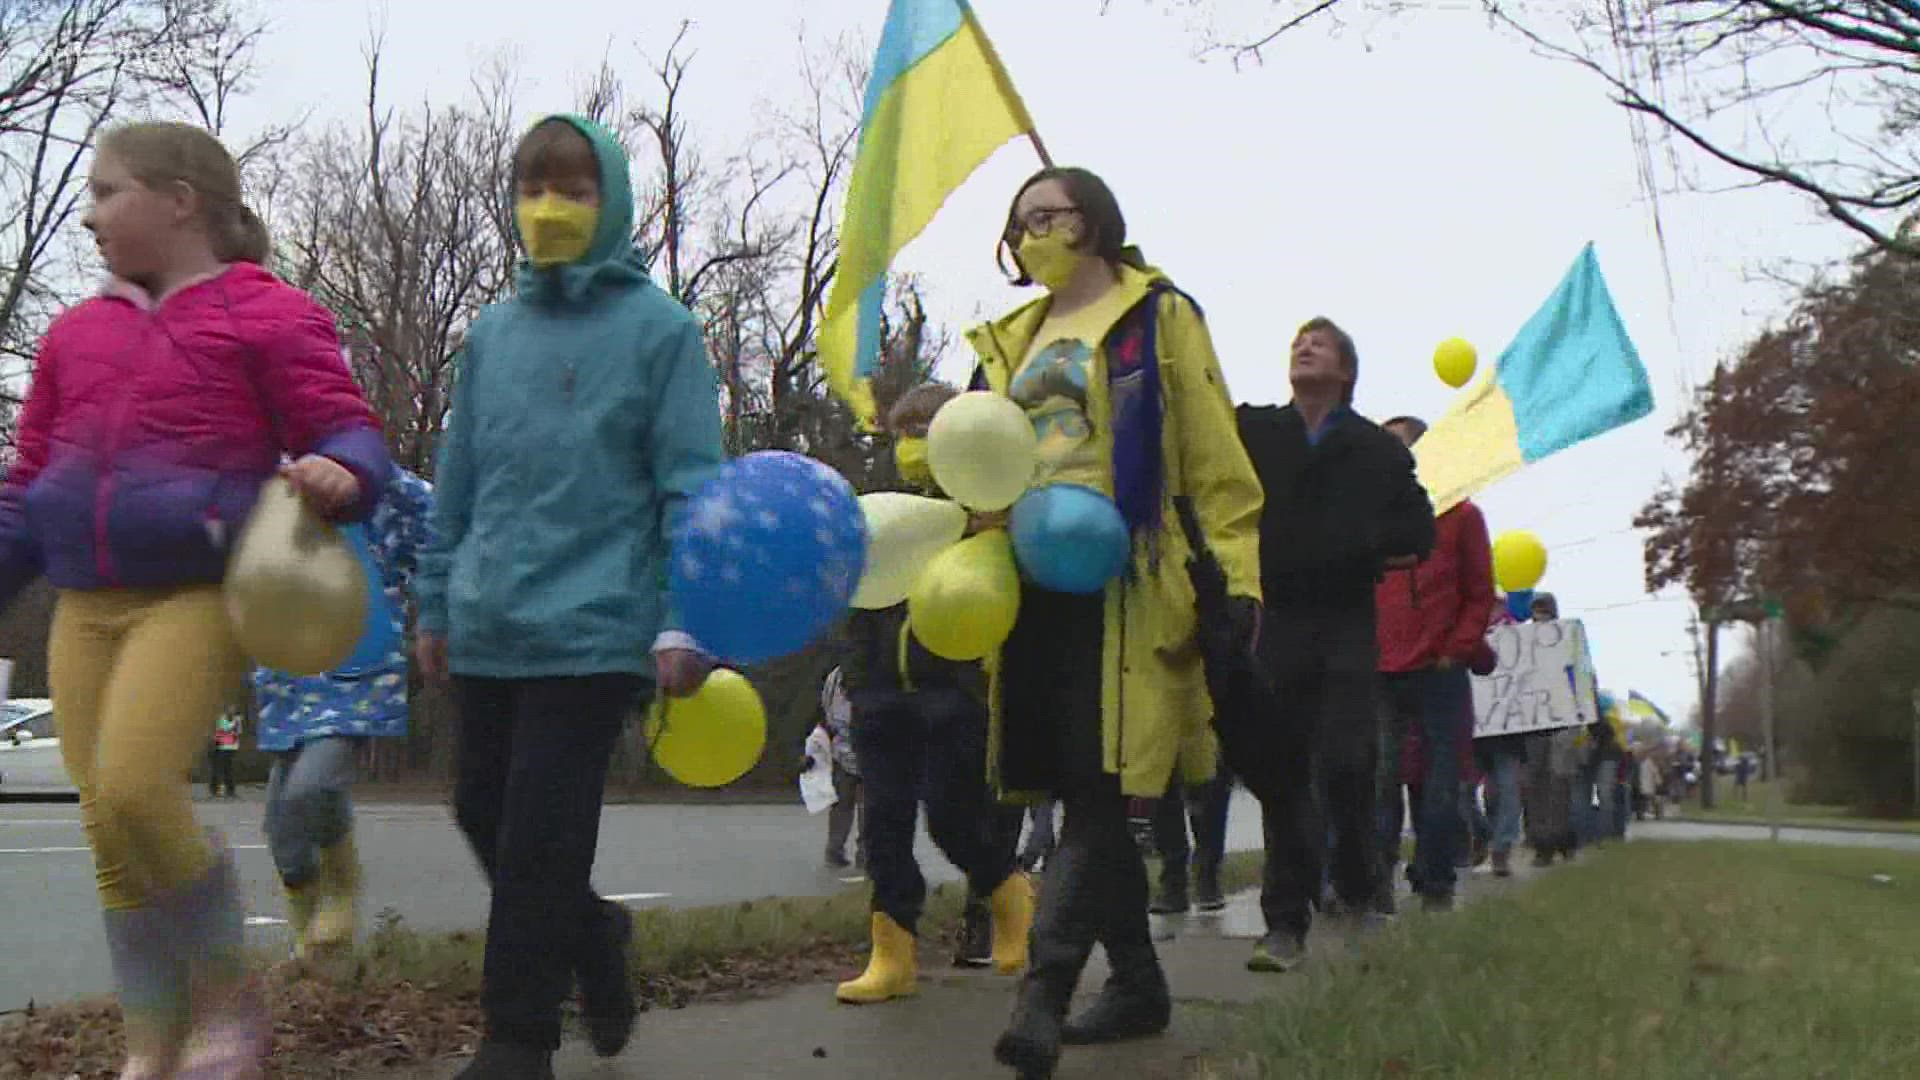 Organizers said they are meeting at Trinity Church on Friendly Avenue in Greensboro to support and uplift Ukrainians.